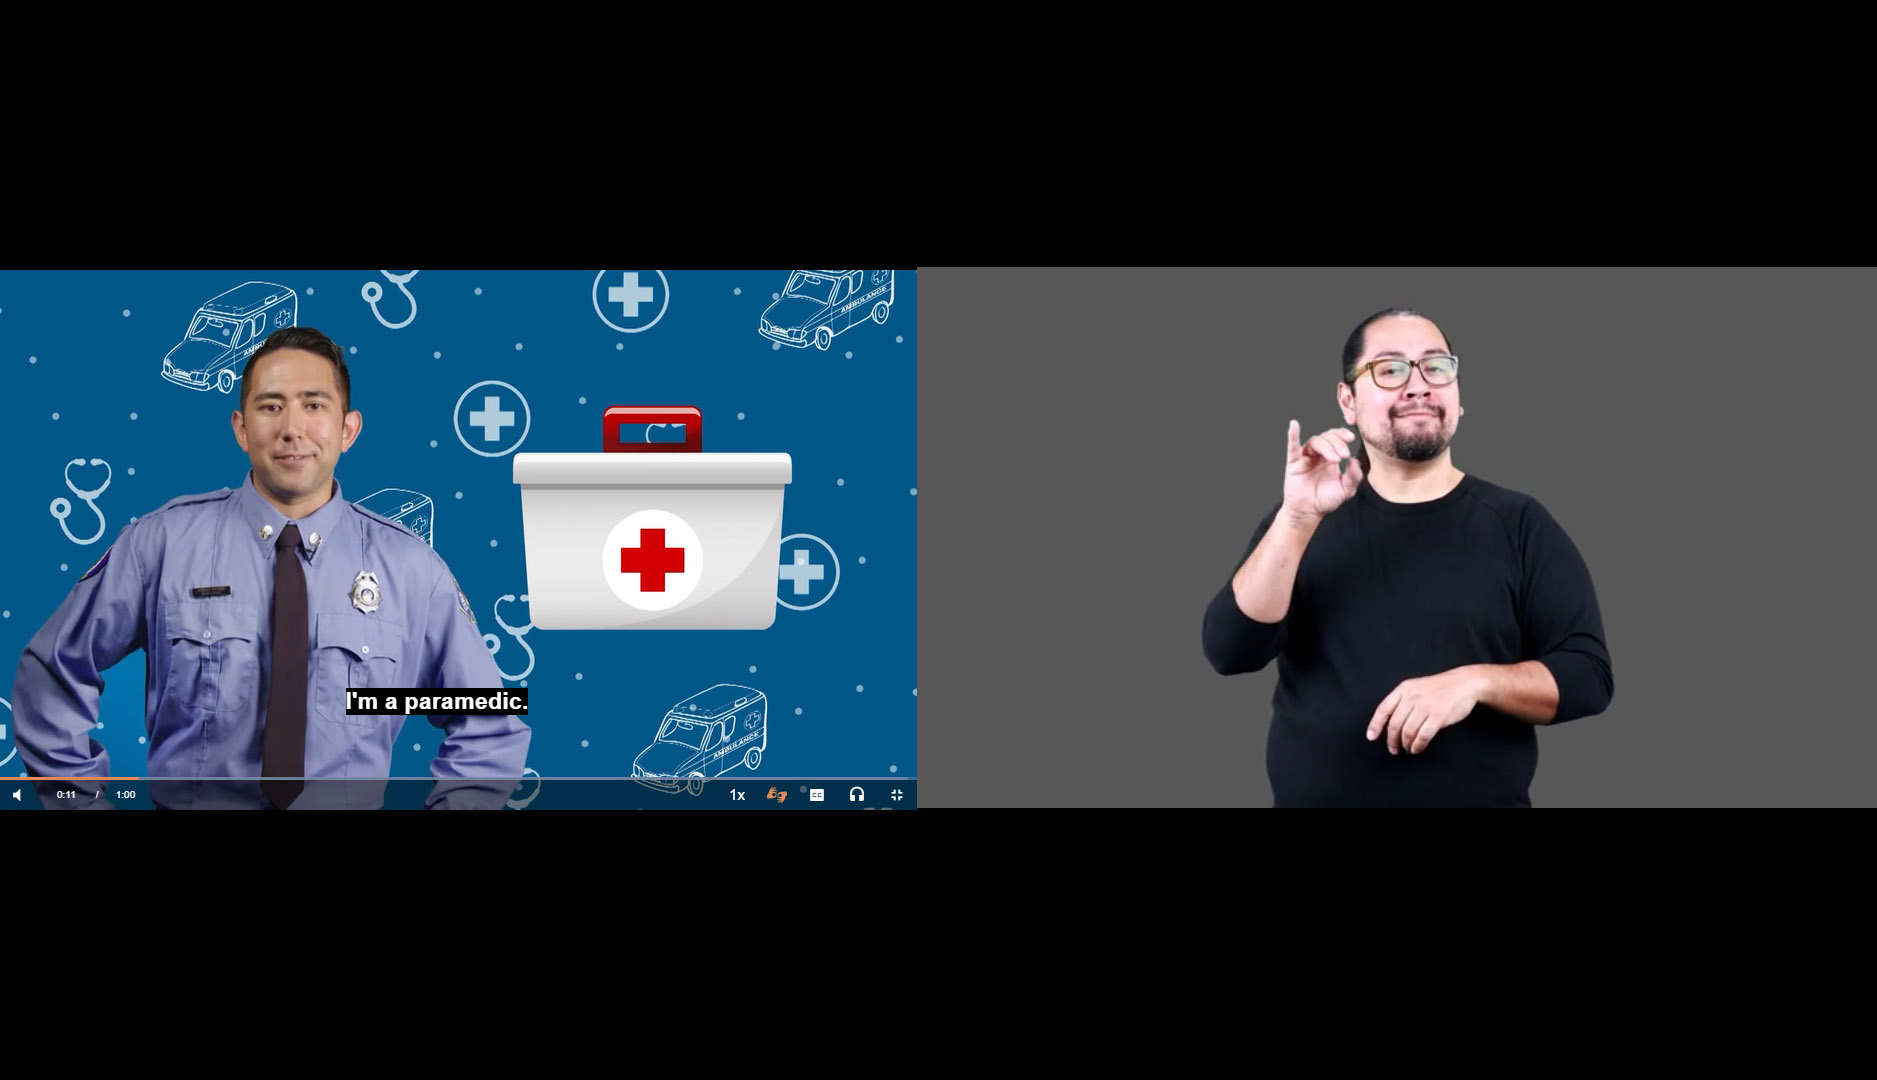 Screen capture of two videos playing side-by-side at the same size. One is an educational video, the second is a sign language interpreter.